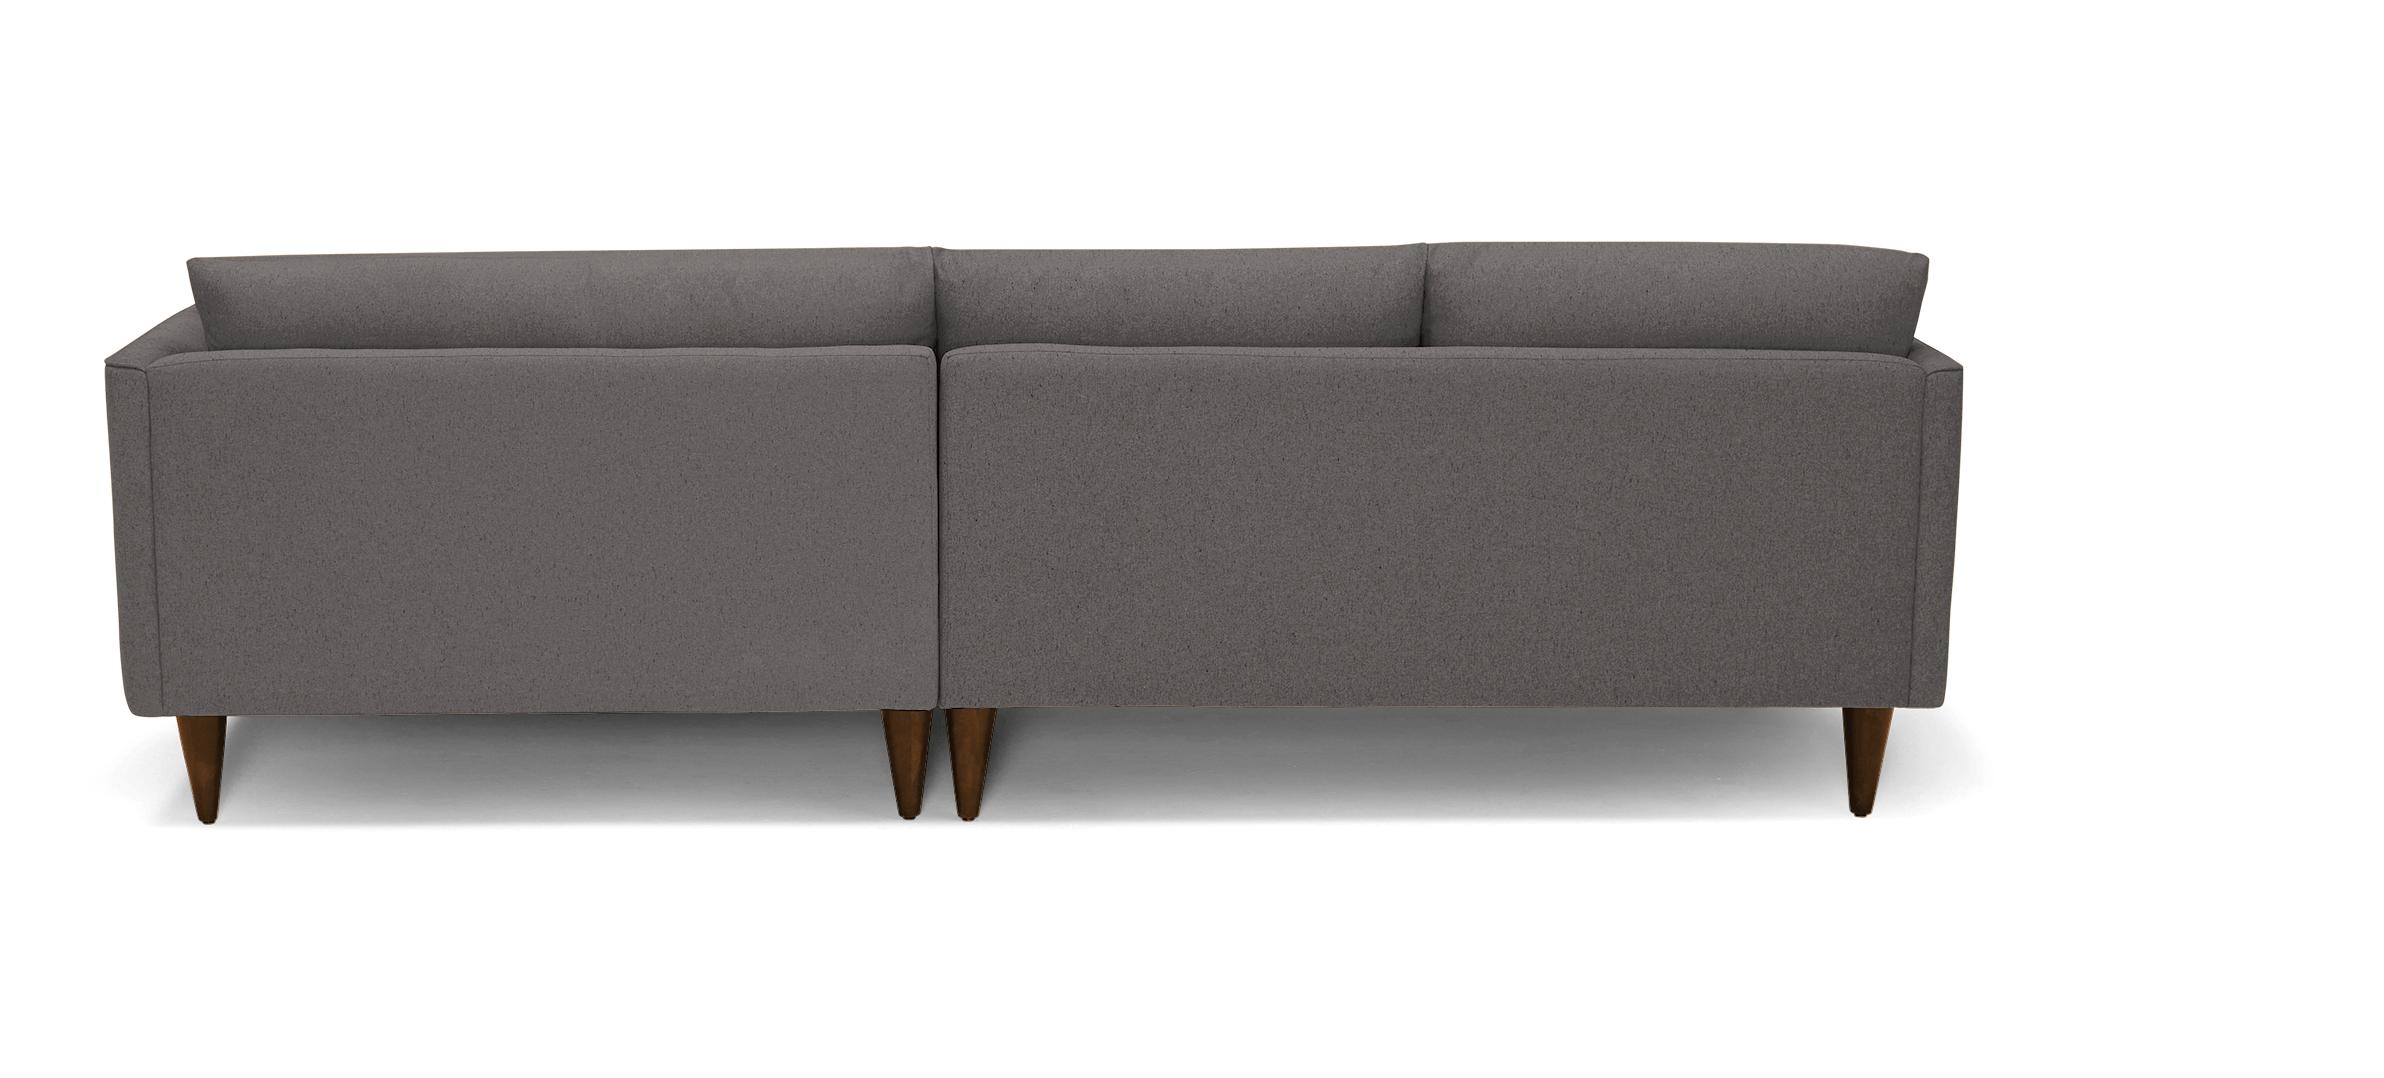 Gray Lewis Mid Century Modern Sectional - Cordova Eclipse - Mocha - Right - Cone - Image 4